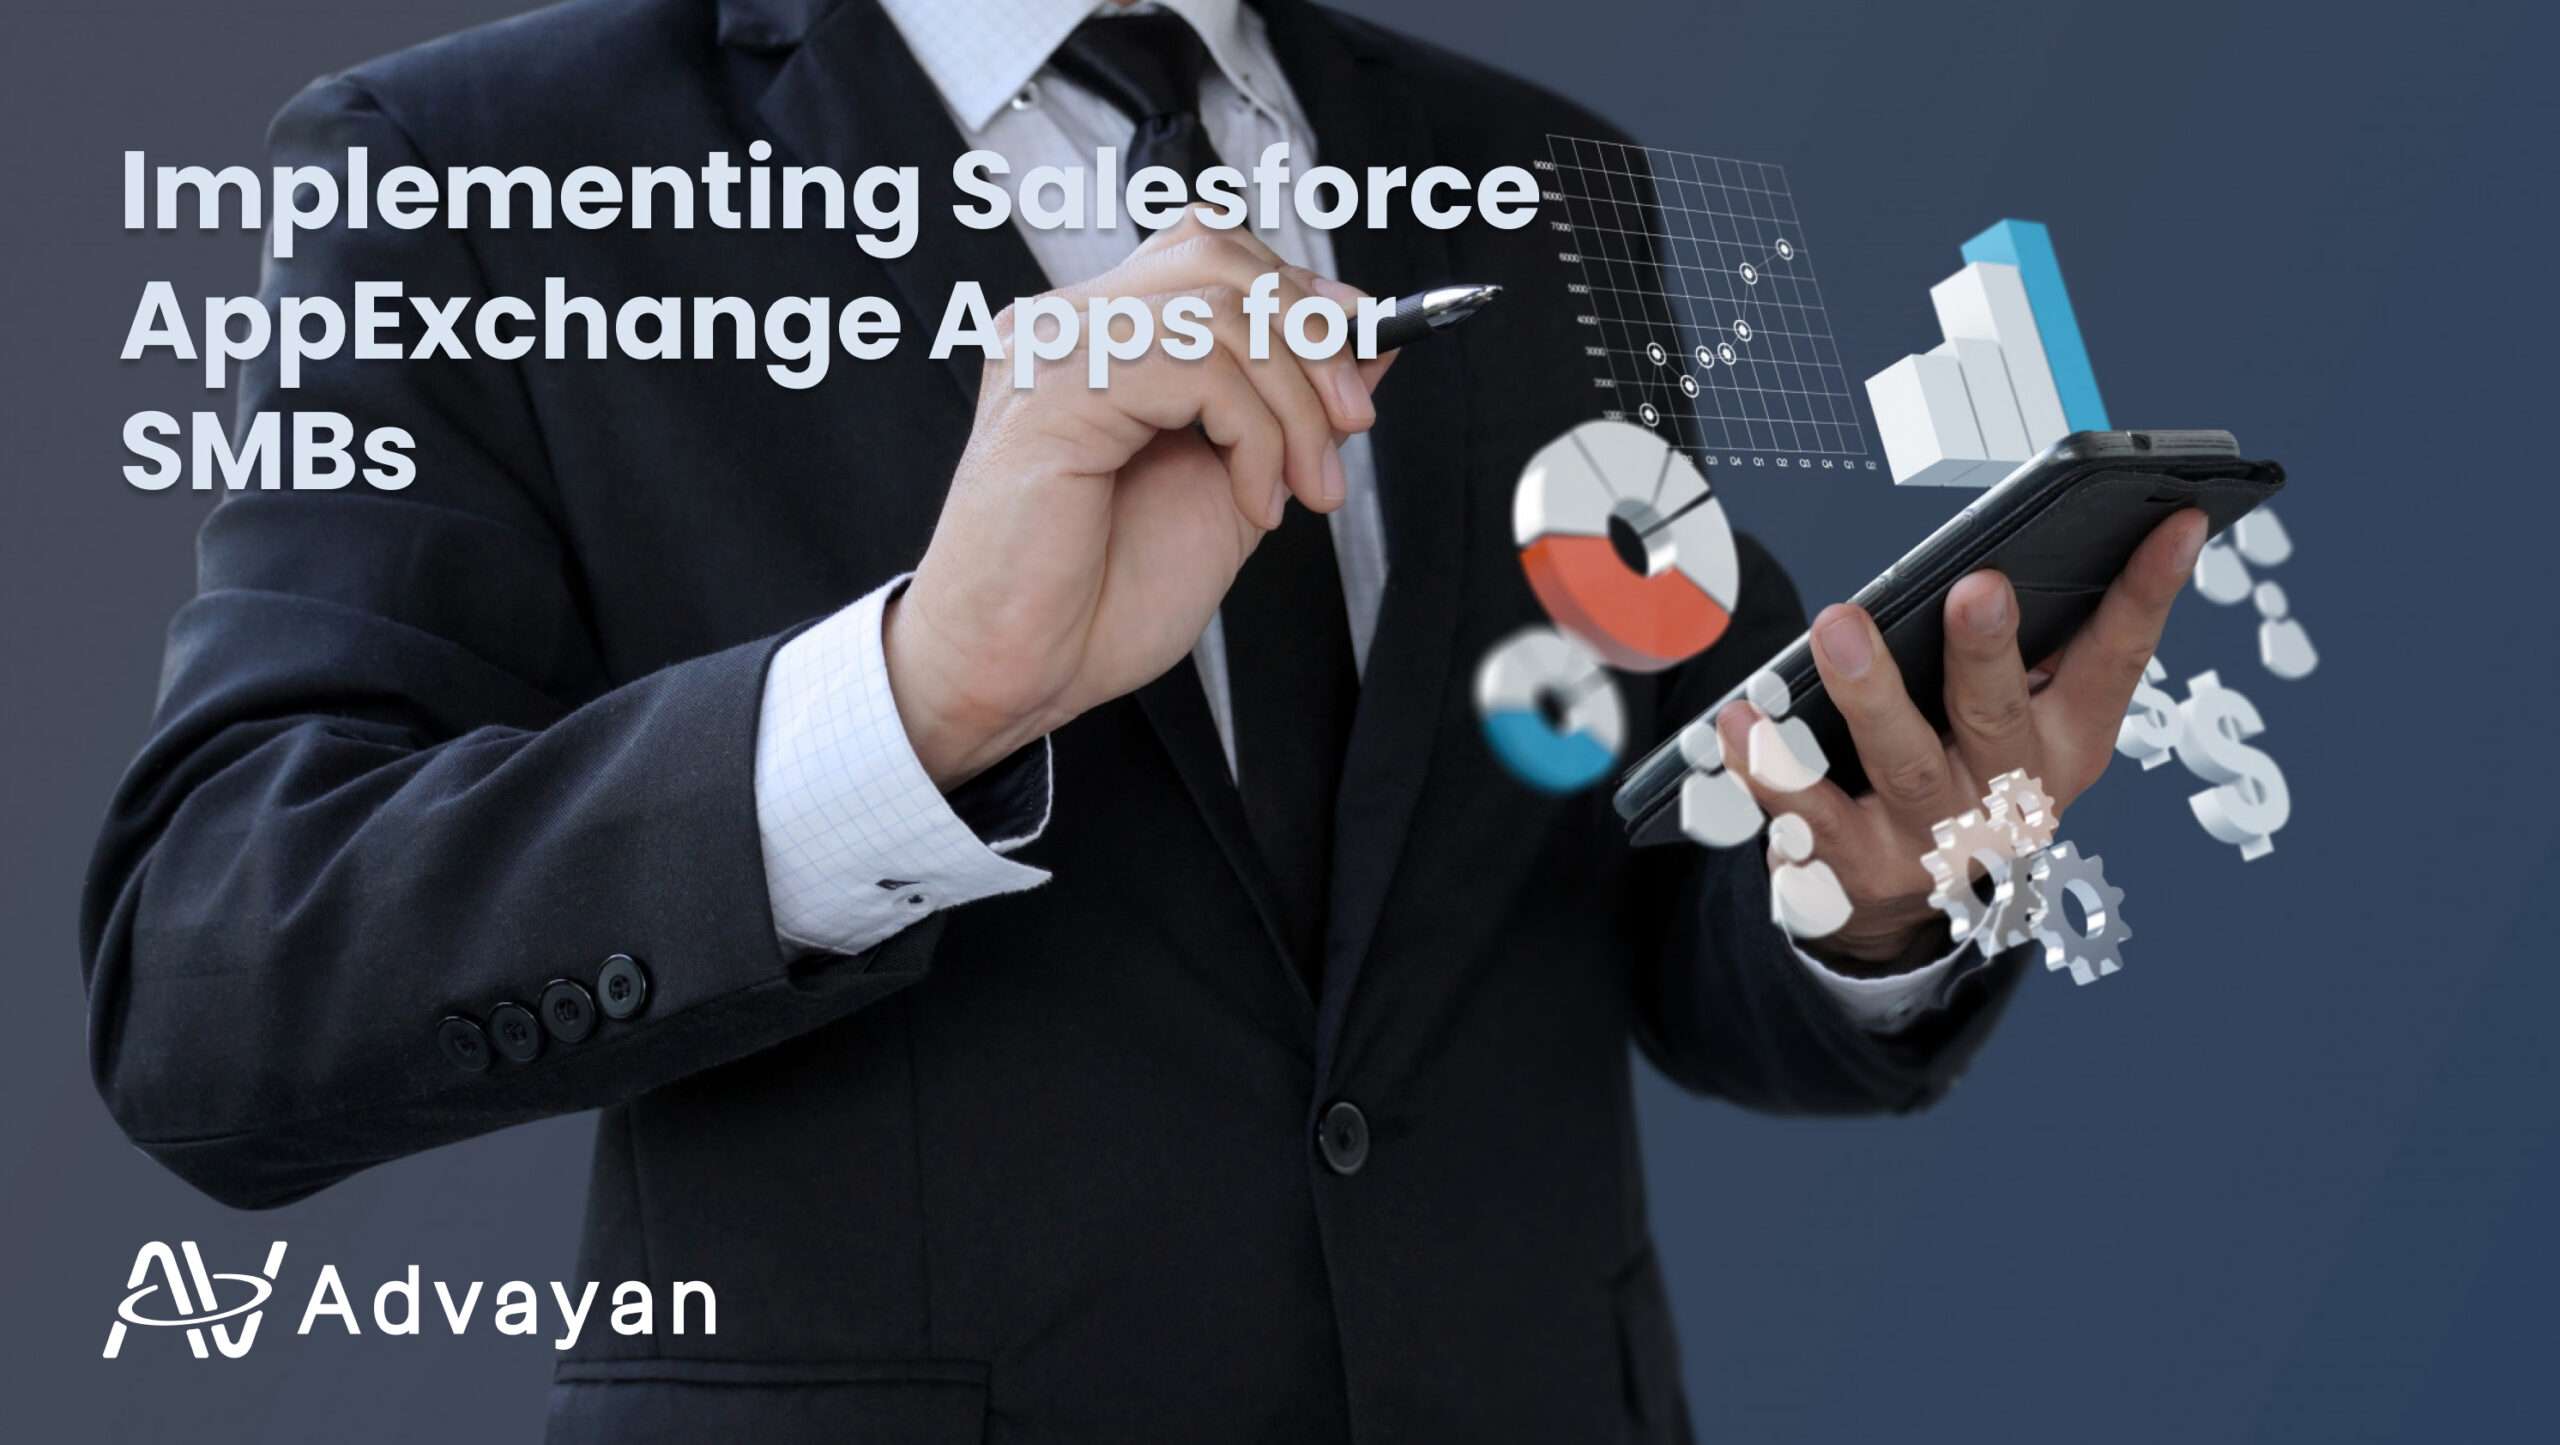  Implementing Salesforce AppExchange Apps for SMBs